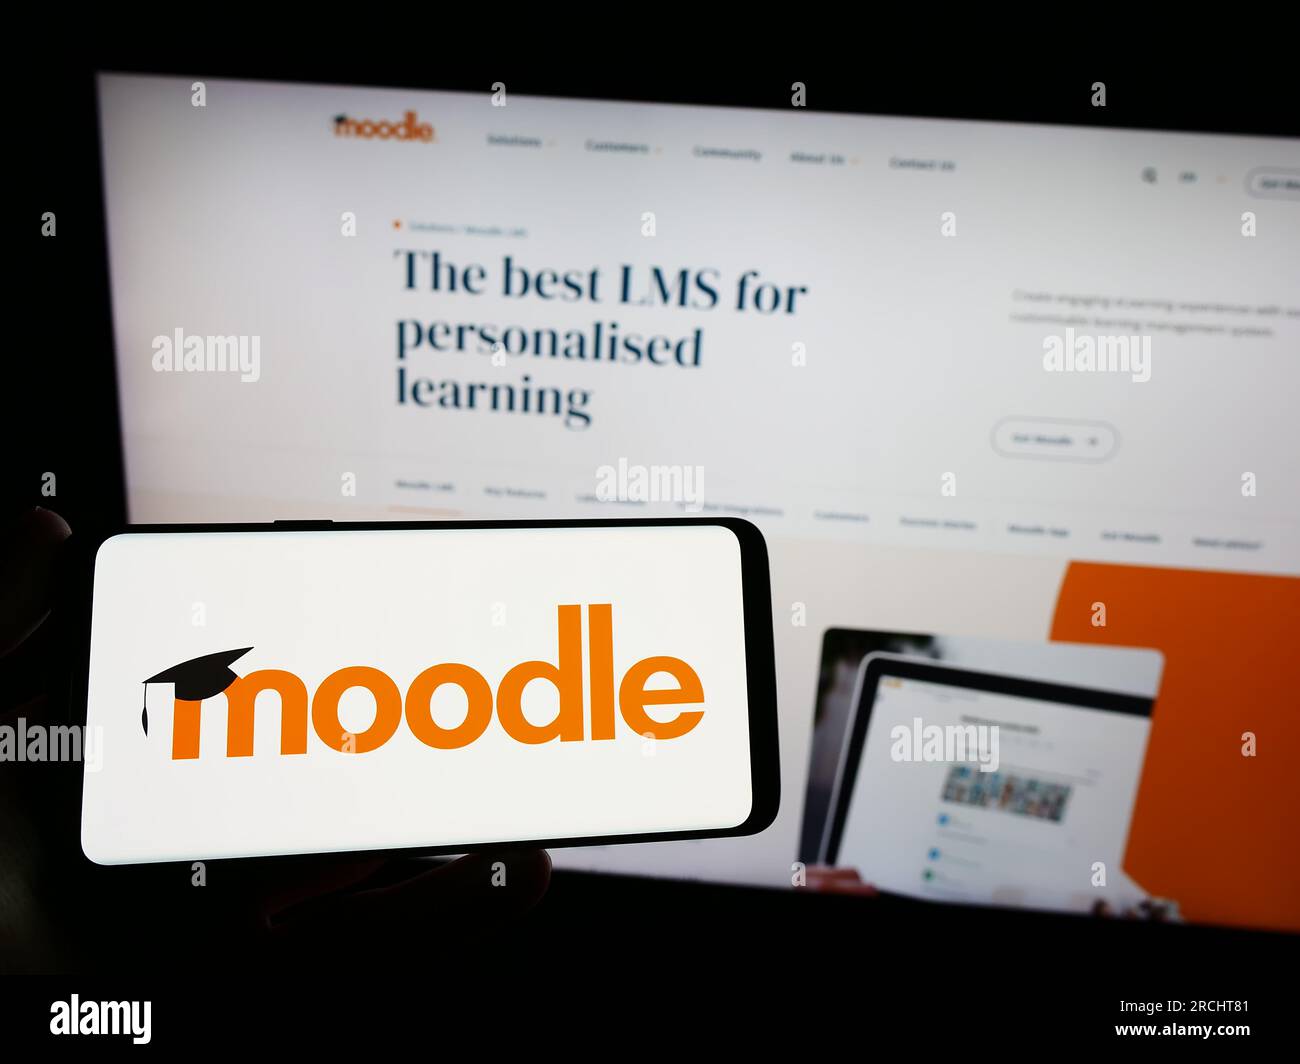 Person holding smartphone with logo of learning platform Moodle on screen in front of website. Focus on phone display. Stock Photo